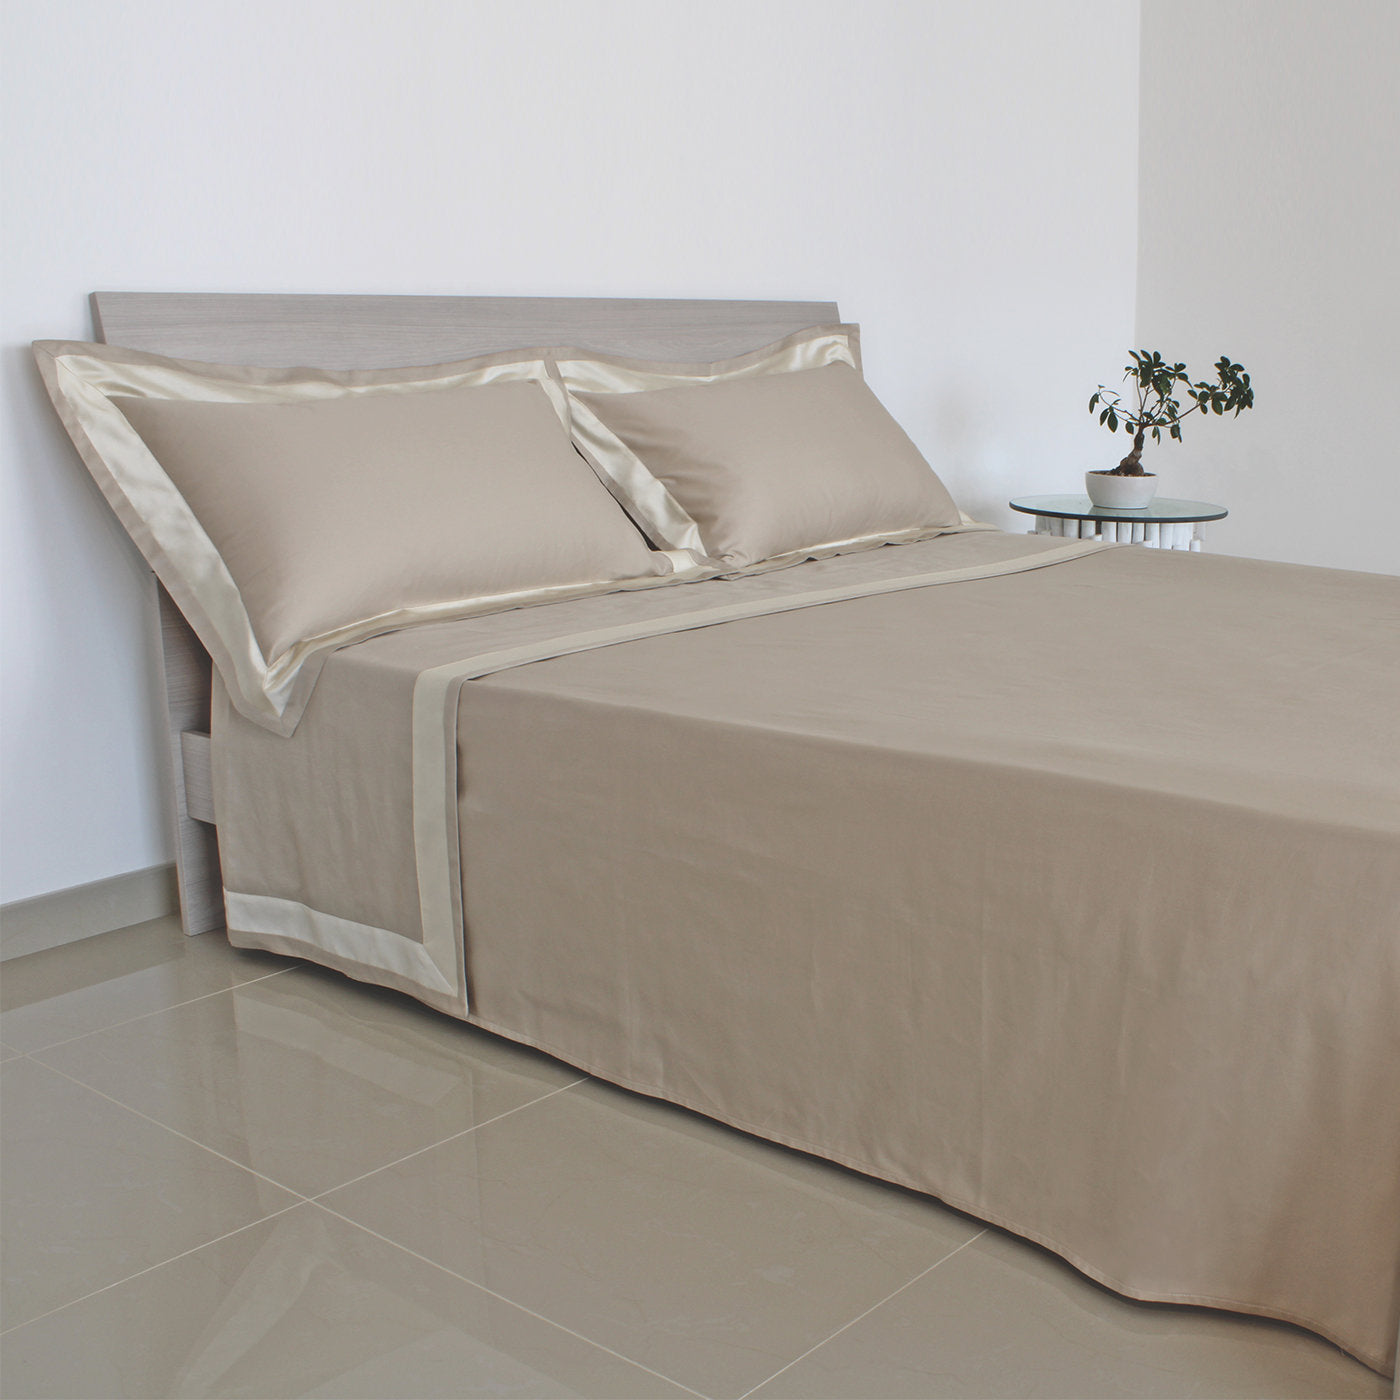 Sand King Size Sheet Set with Pillowcases - Alternative view 1